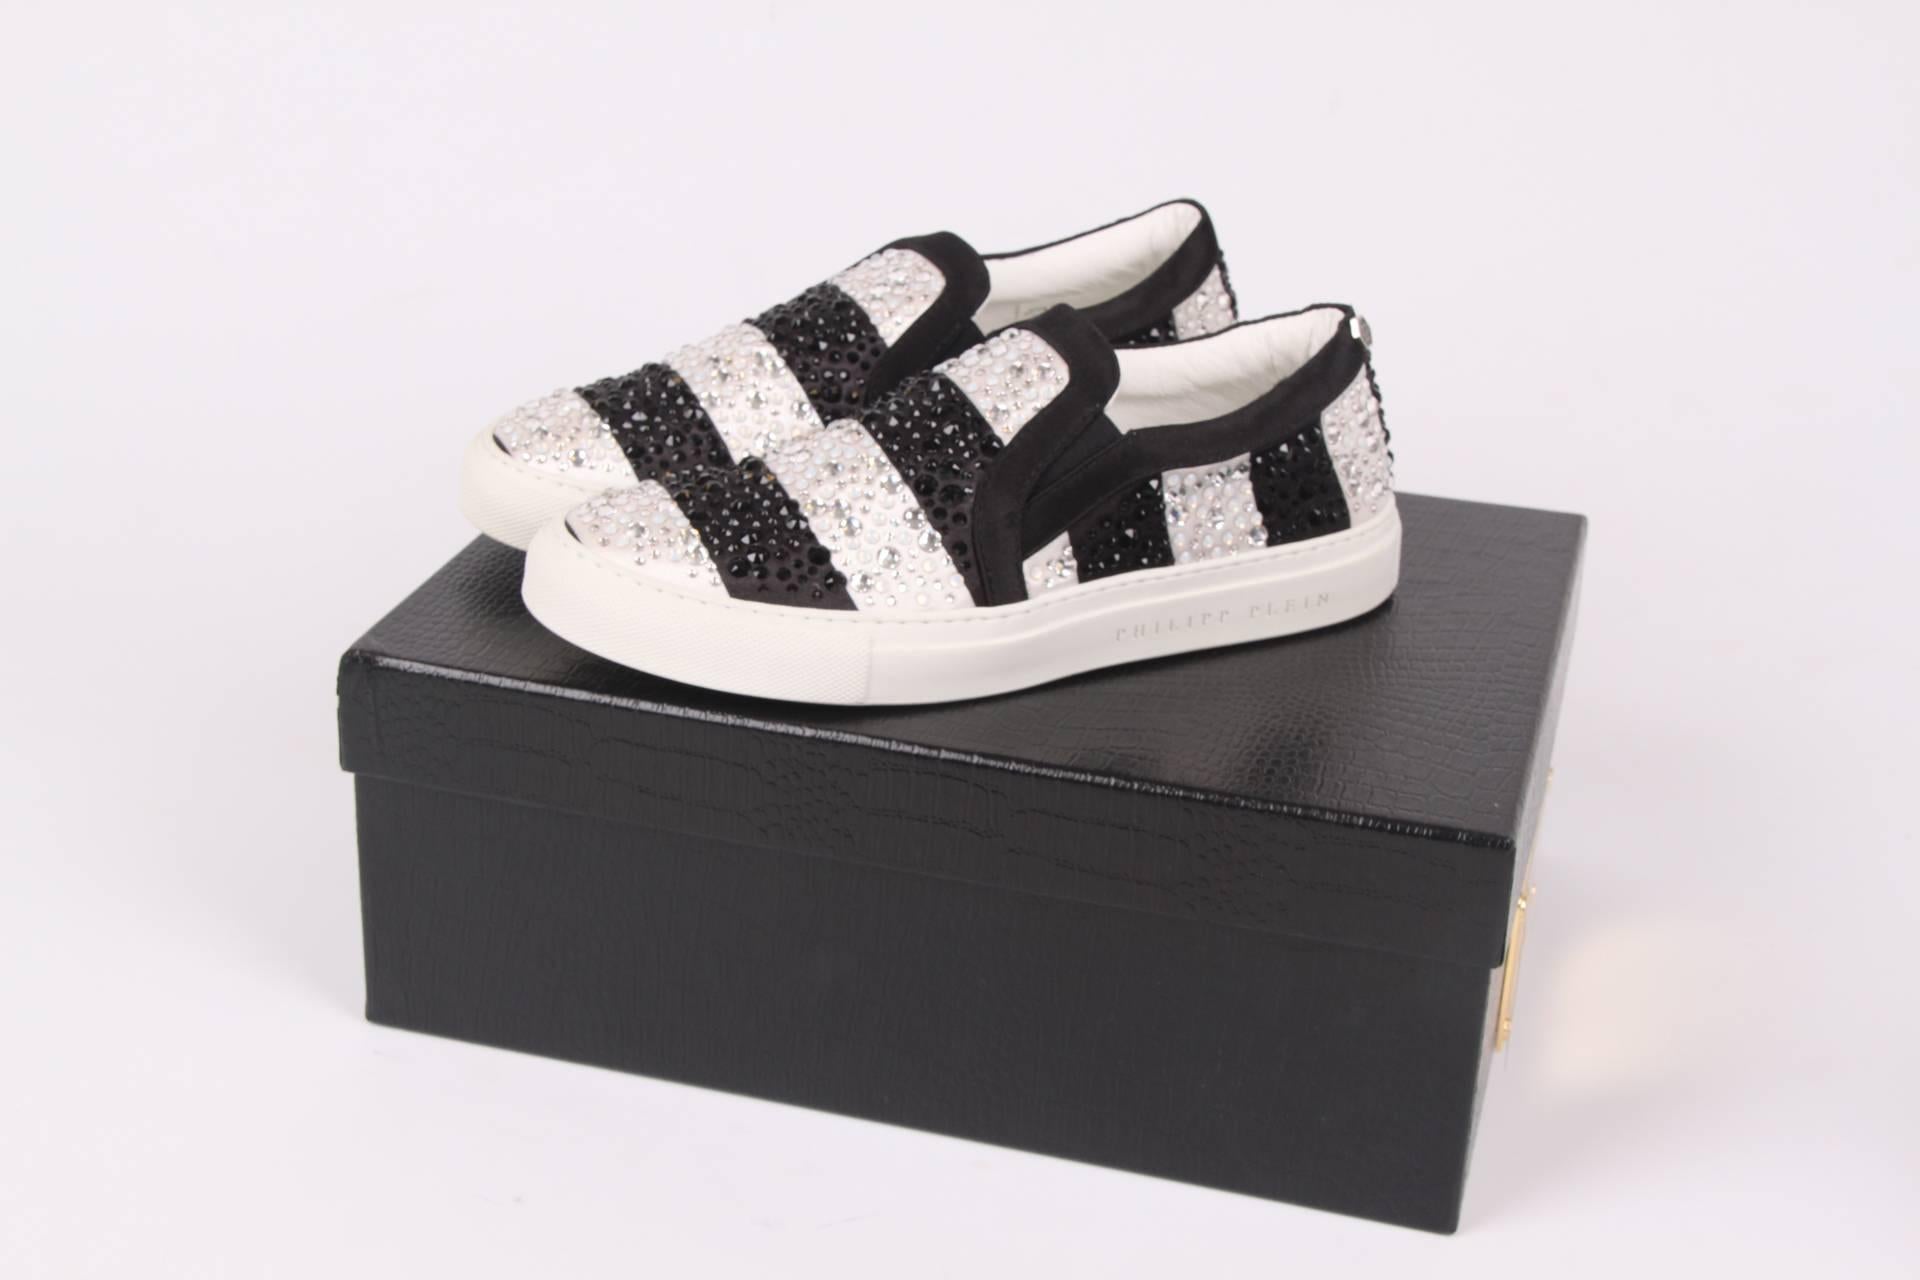 Limited edition Philipp Plein slip-on sneakers; coooool!!

Black/silver striped slip-ons covered with Swarovski crystals in black and silver. The outsole is crafted in white rubber, inside lining in white rubber.

The crystals are hand embroidered